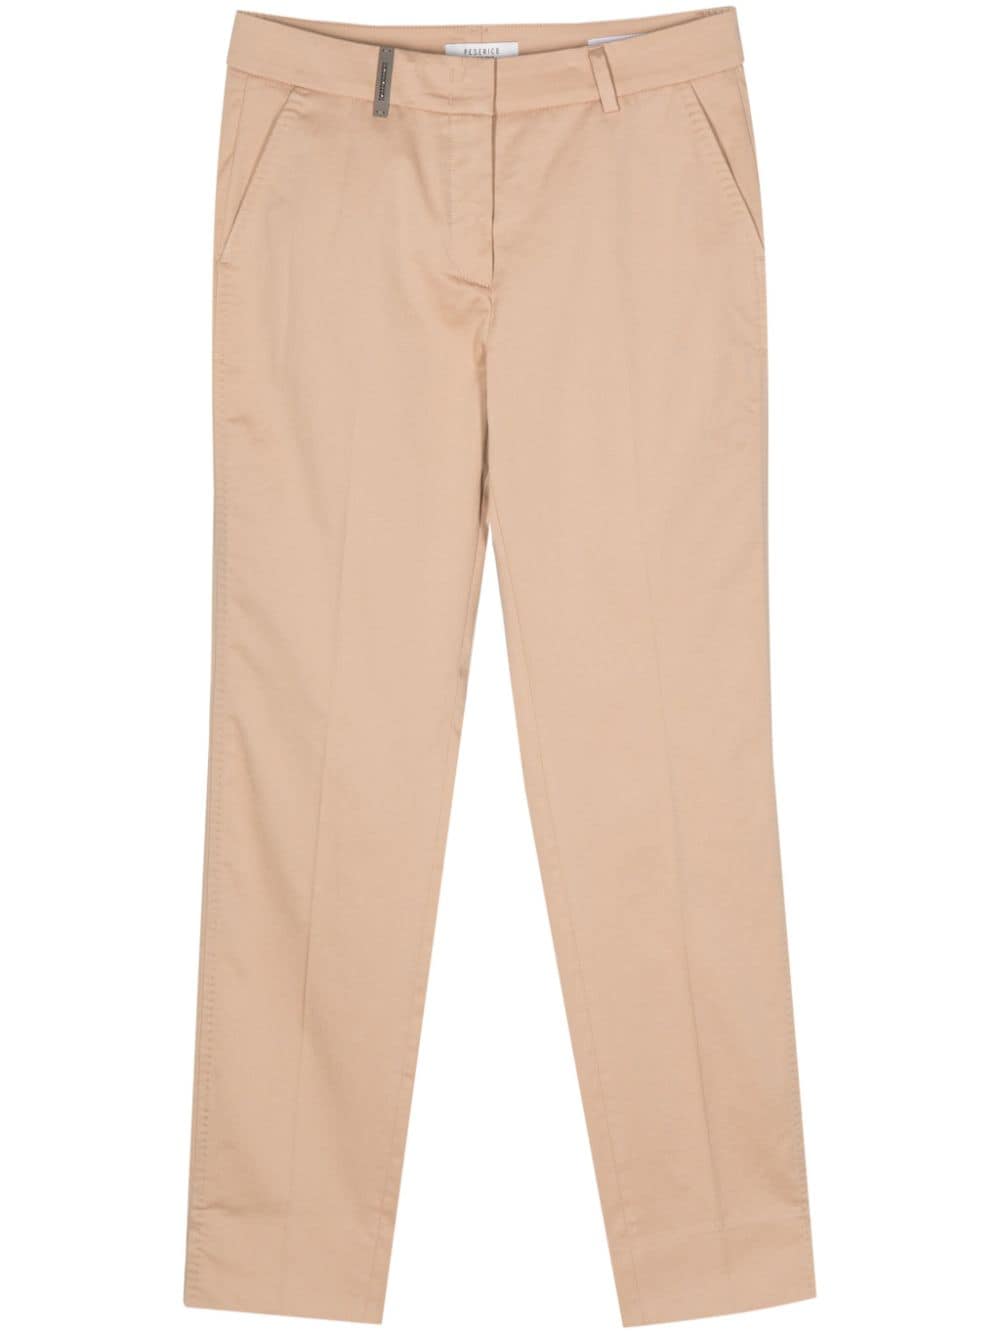 Peserico 4718 tailored trousers - Brown von Peserico